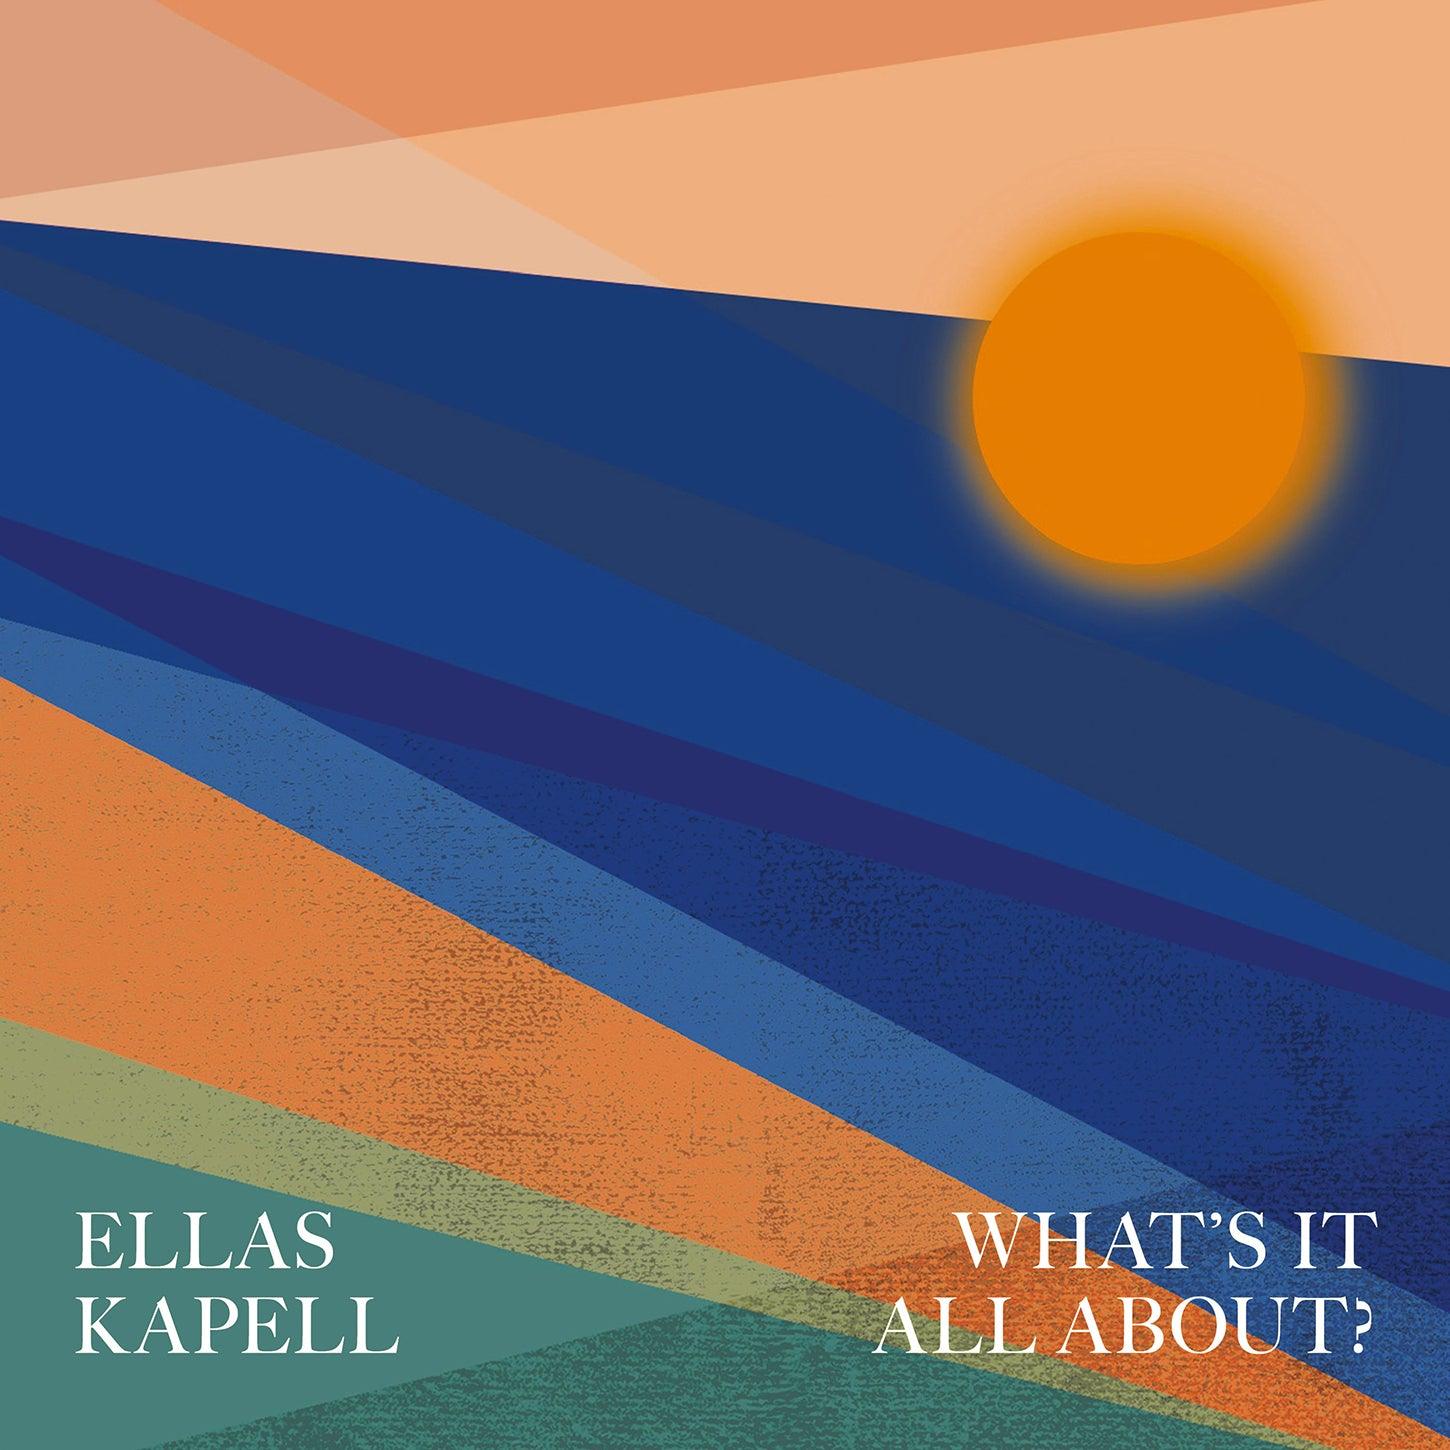 Berlin, Bacharach, The Beatles: What's it All About? / Ellas Kapell - ArkivMusic